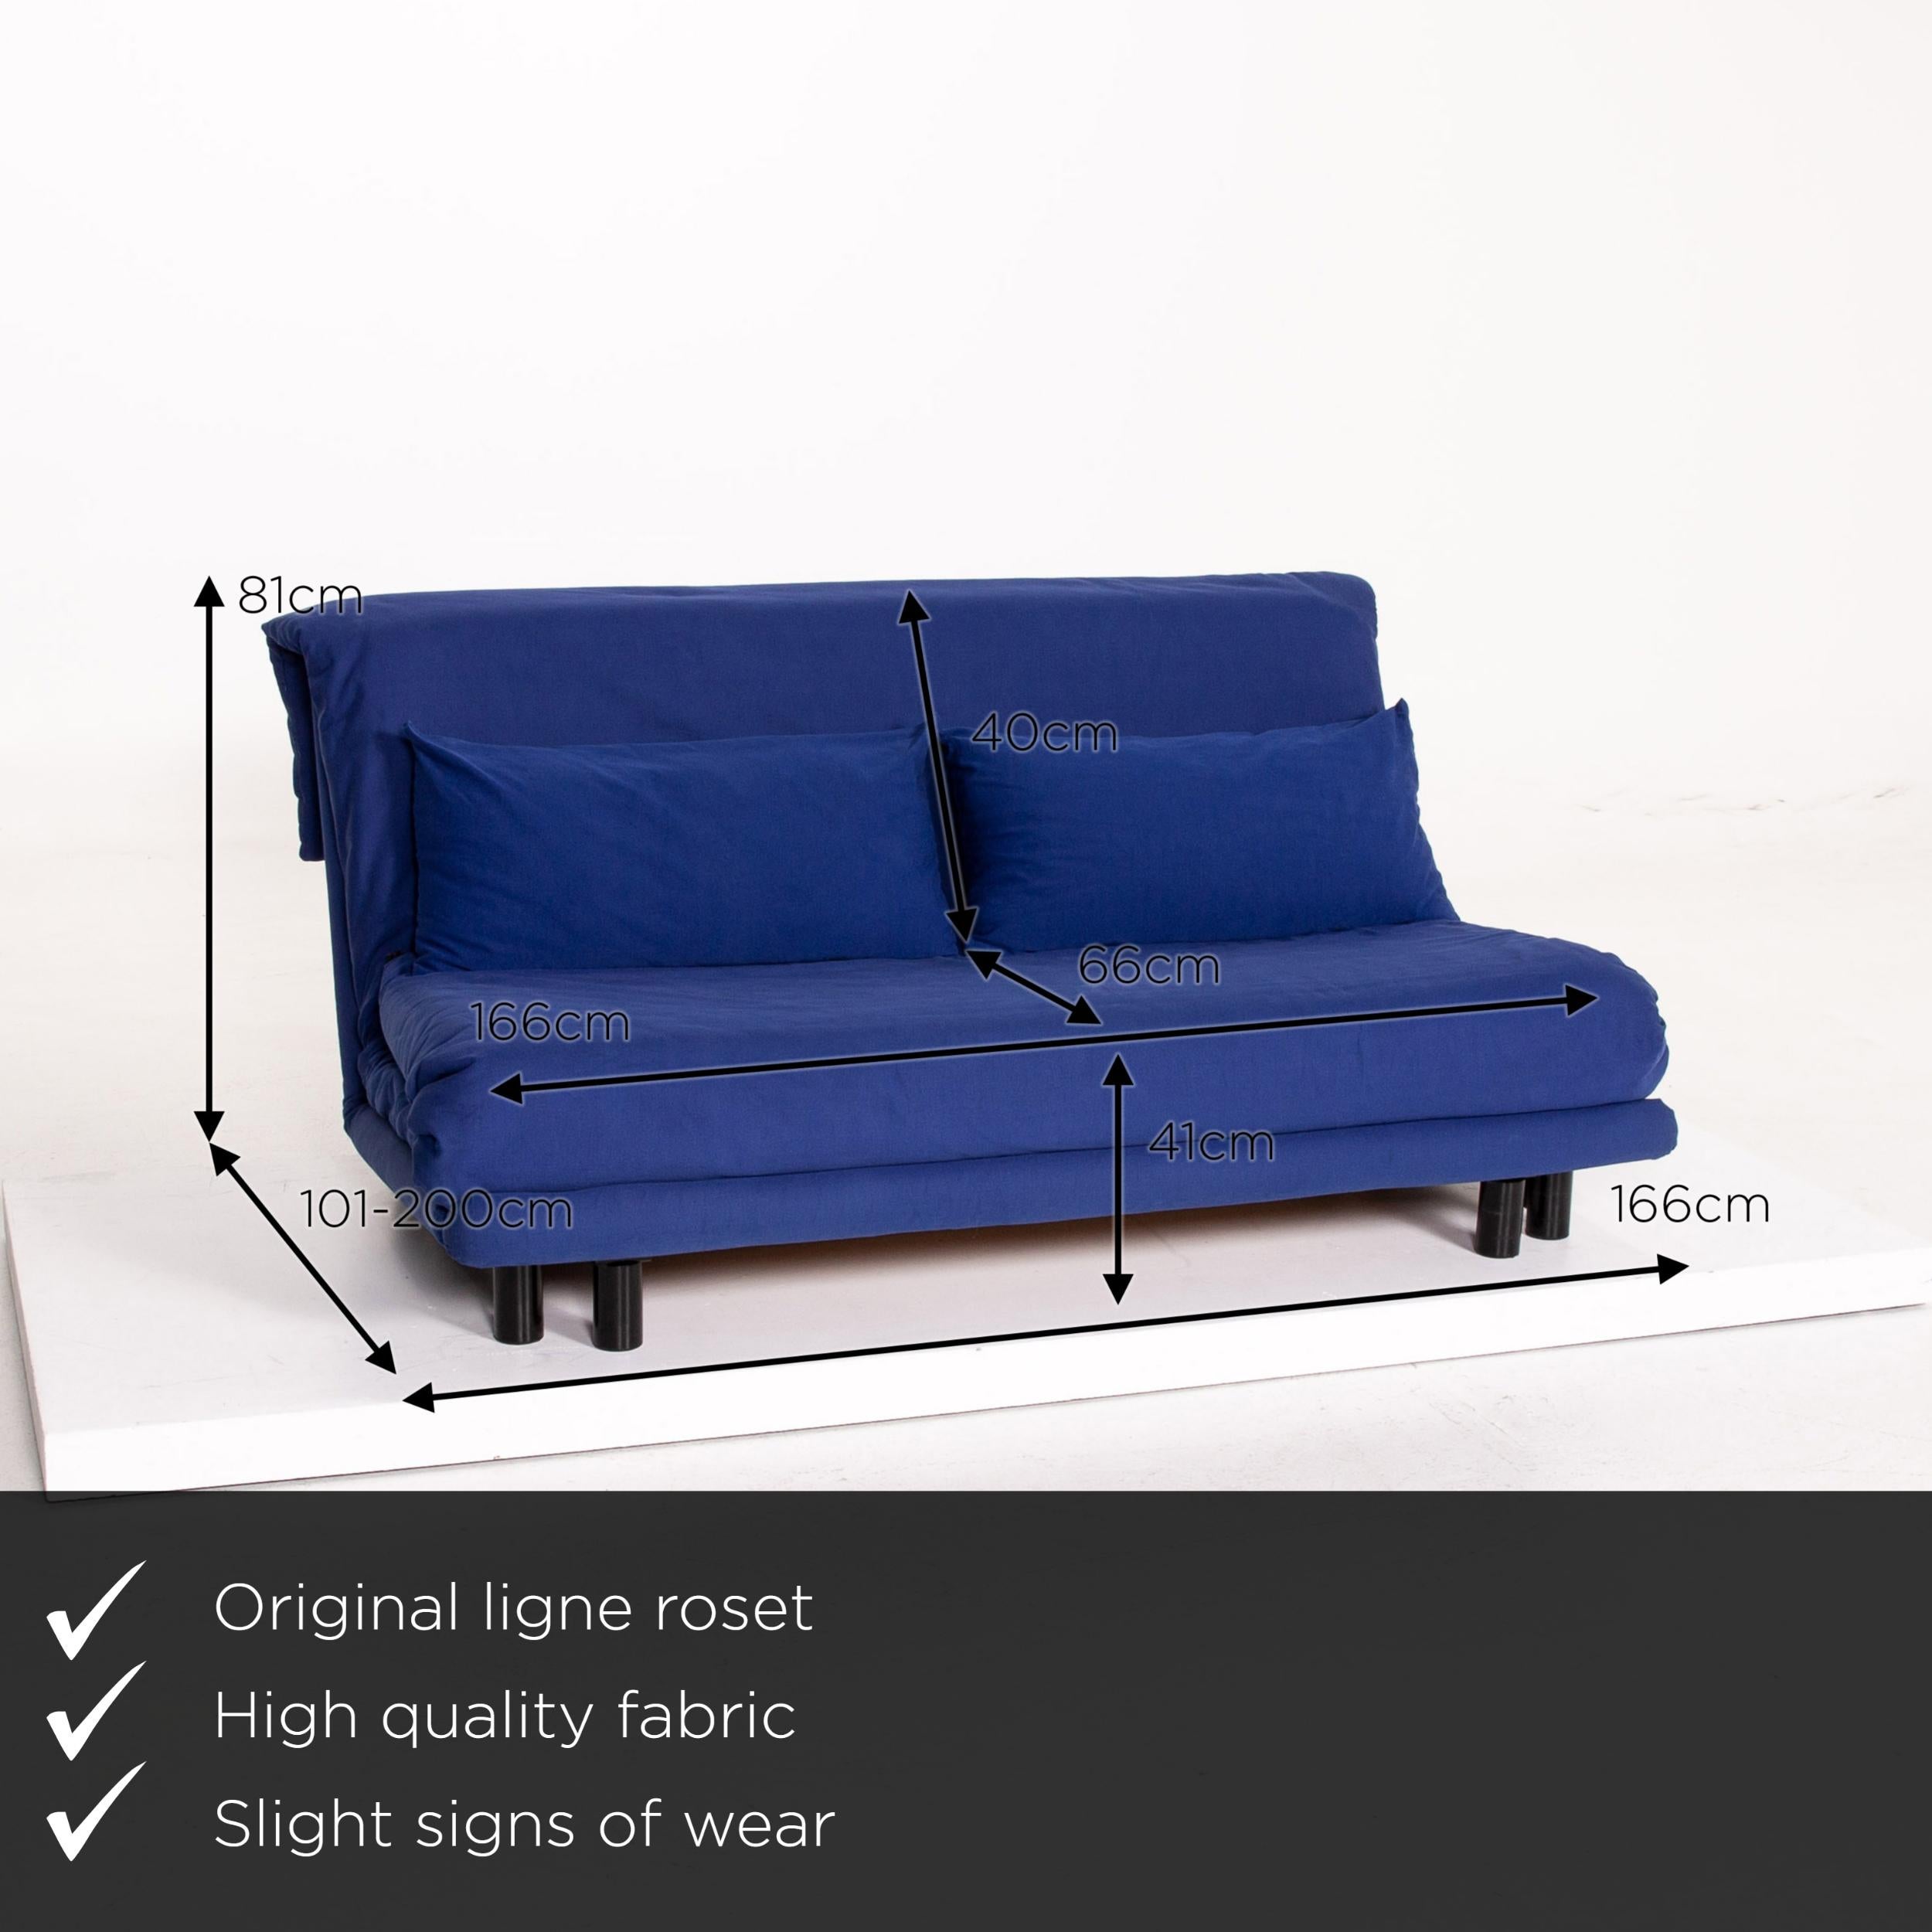 We present to you a Ligne Roset Multy fabric sofa blue sleep function sofa bed couch.

 

 Product measurements in centimeters:
 

Depth 101
Width 166
Height 81
Seat height 41
Seat depth 66
Seat width 166
Back height 40.
 